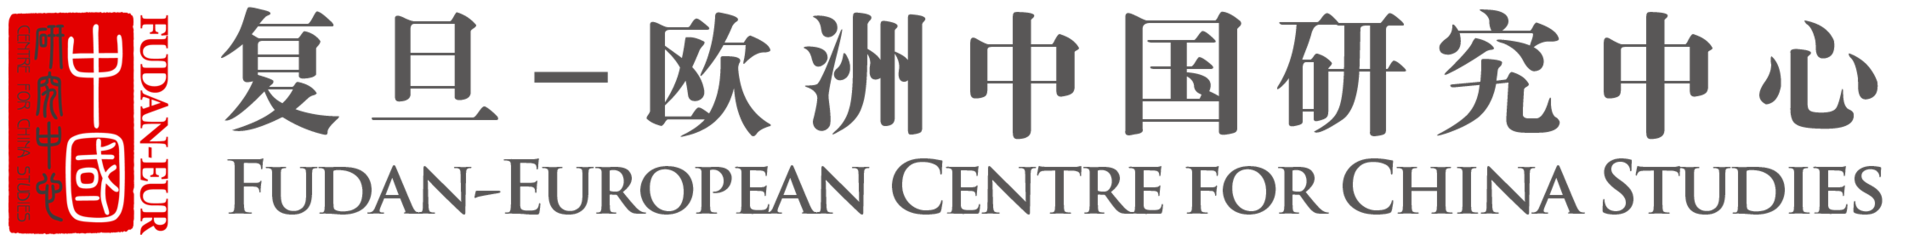 The logo of the Fudan-European Centre for China Studies. A mix of Chinese and Latin letters.